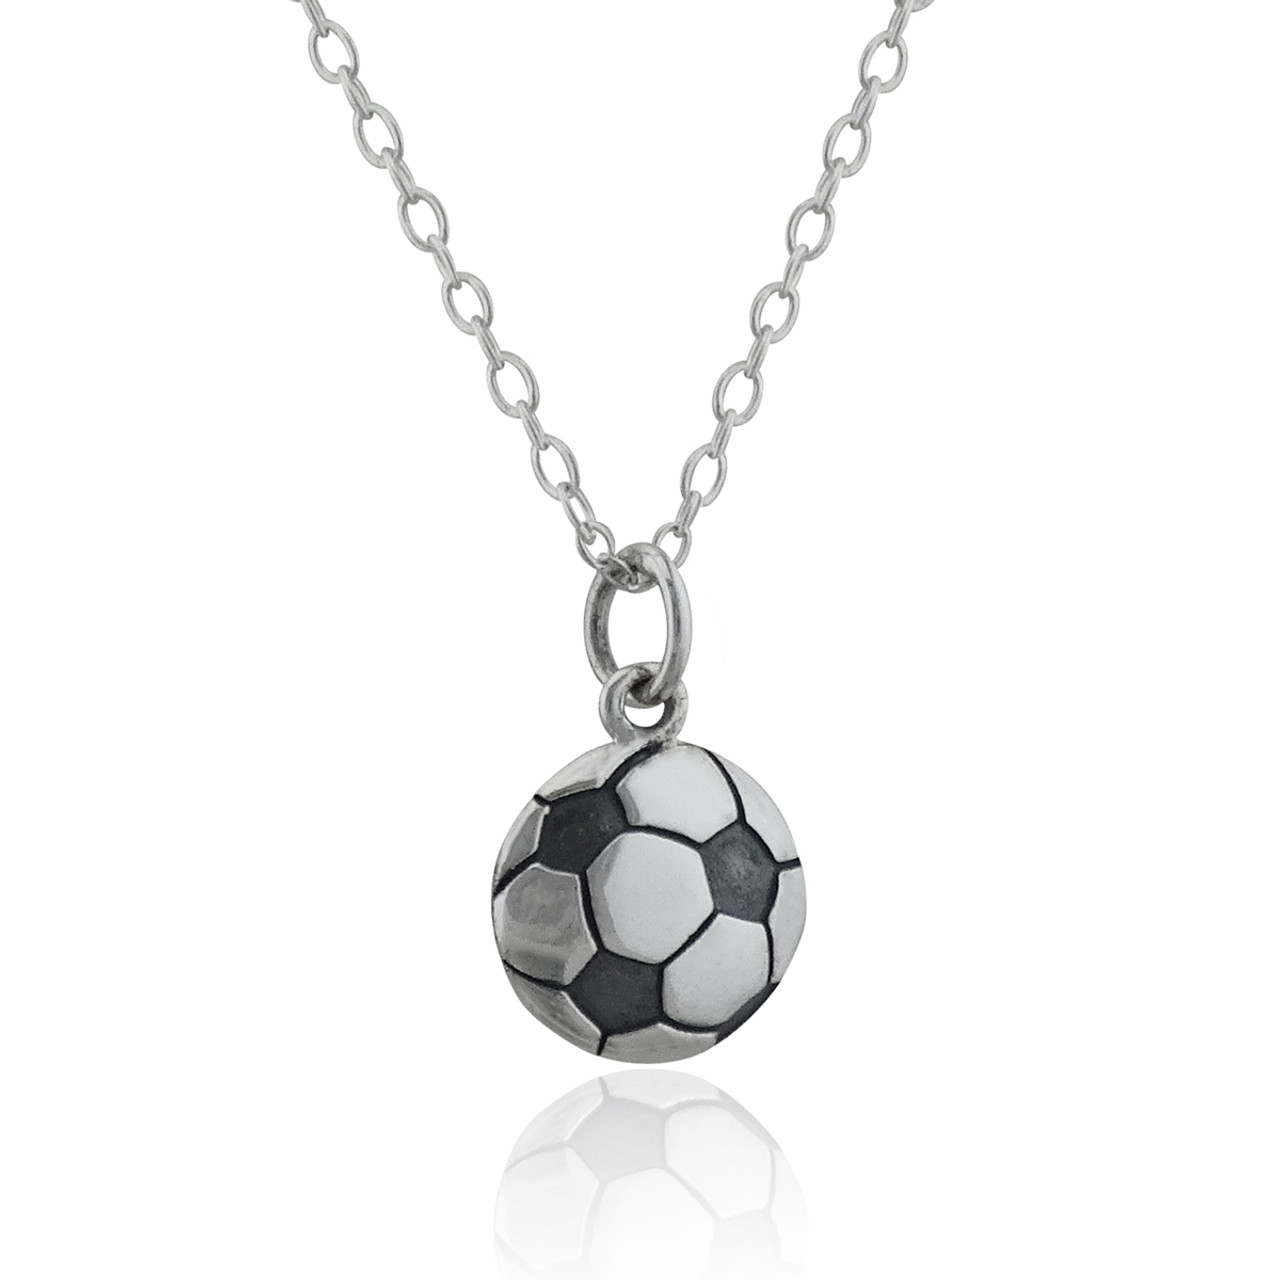 Gold Pendant in Shape of Soccer Ball on Chain Stock Image - Image of chain,  gold: 13842521